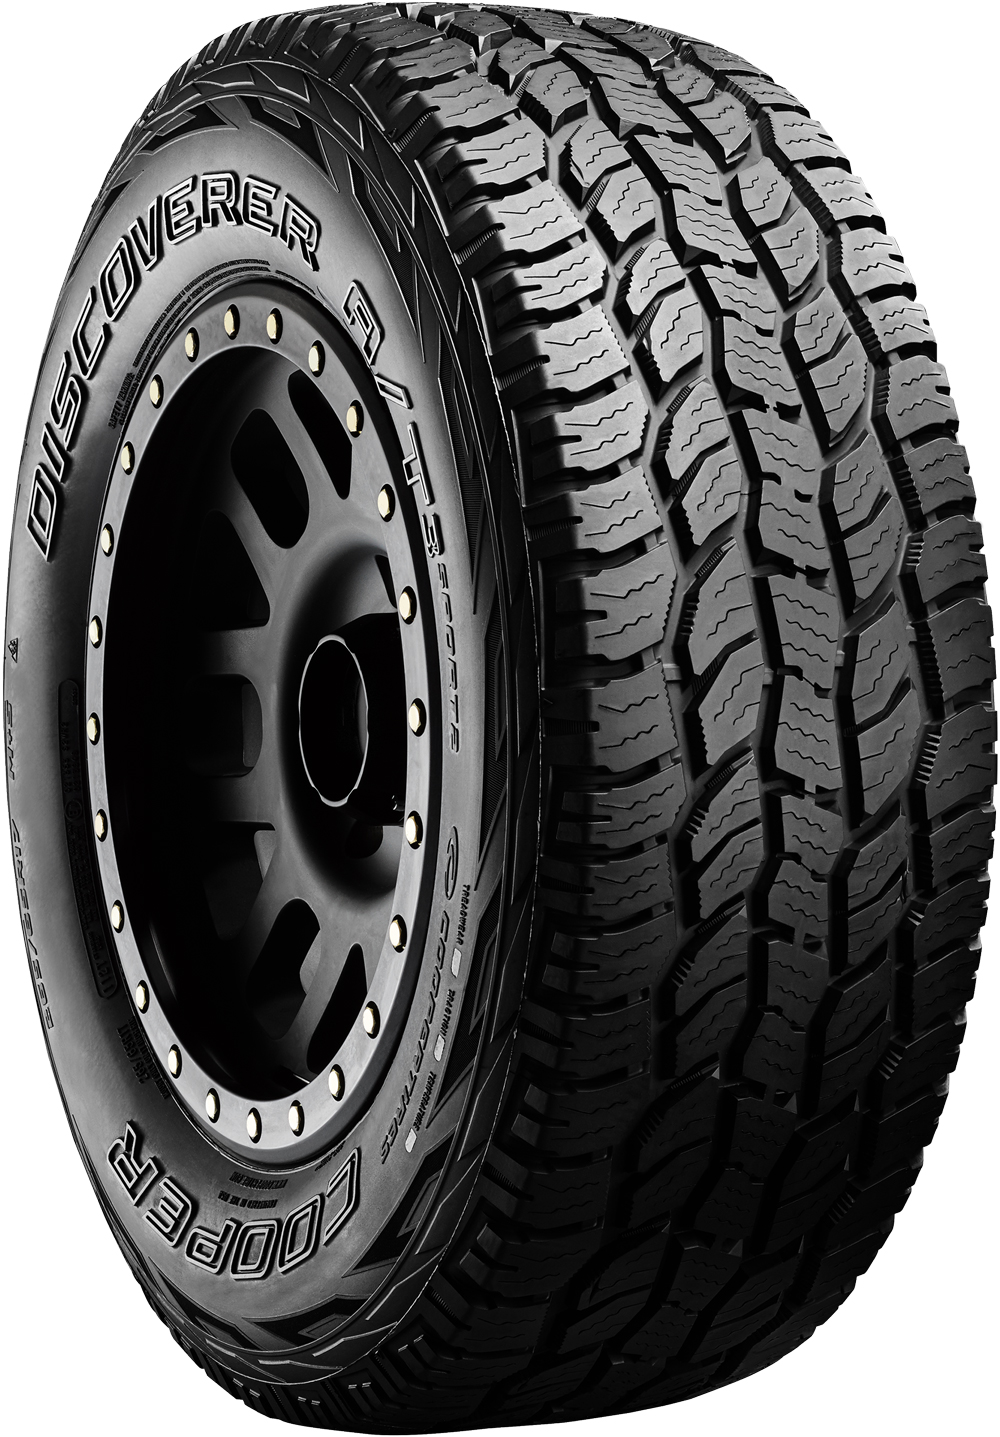 Джипови гуми COOPER DISCOVERER A/T3 SPORT 2 BSW XL 195/80 R15 100T